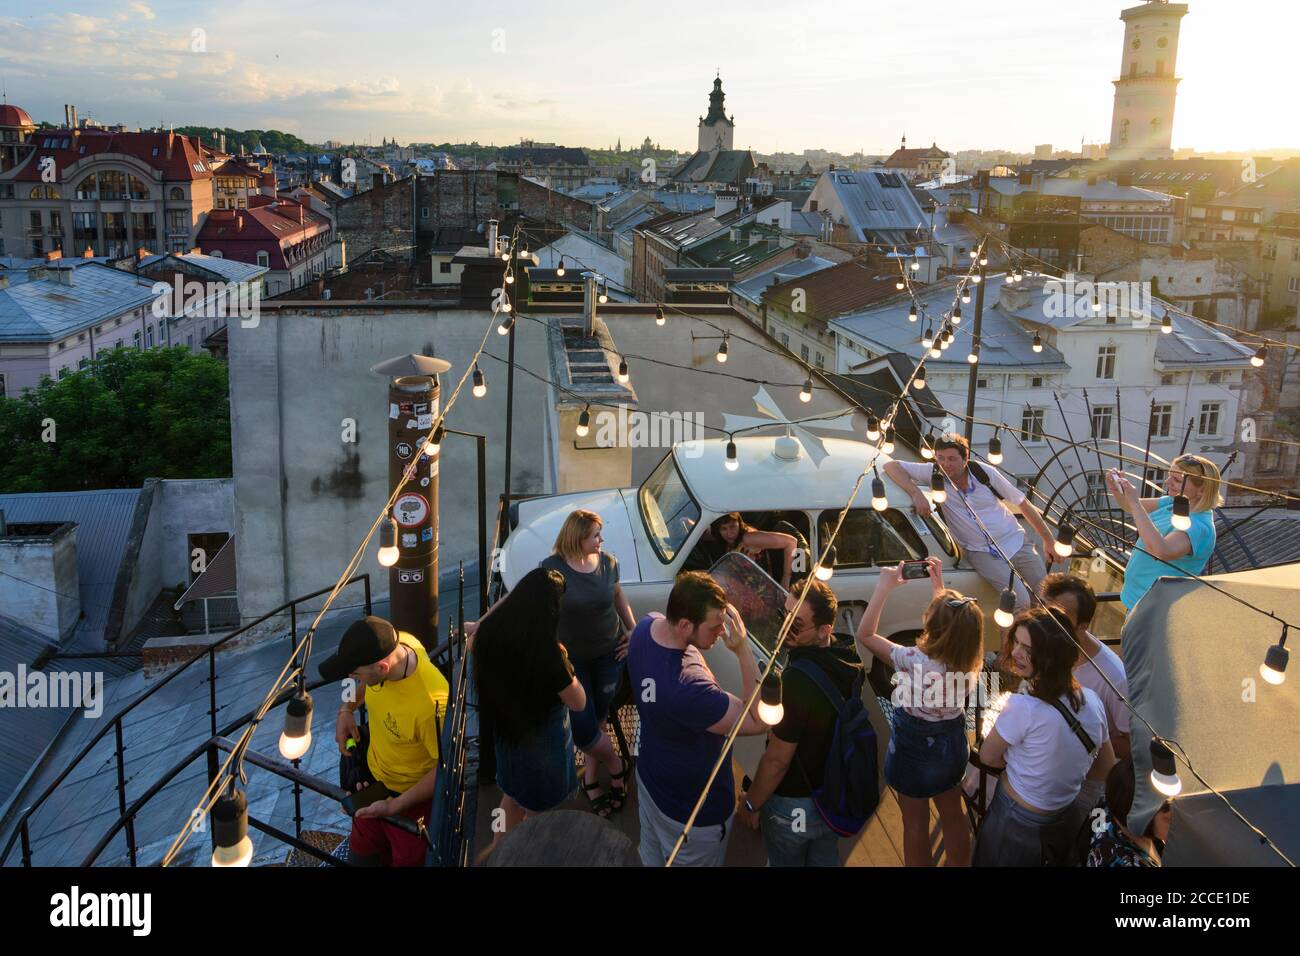 Lviv (Lwiw, Lemberg), Dim Lehend (House of Legends), roof terrace, car Trabant 601, bar, roofs of Old Town, tower of Town Hall, people in Lviv Oblast, Stock Photo